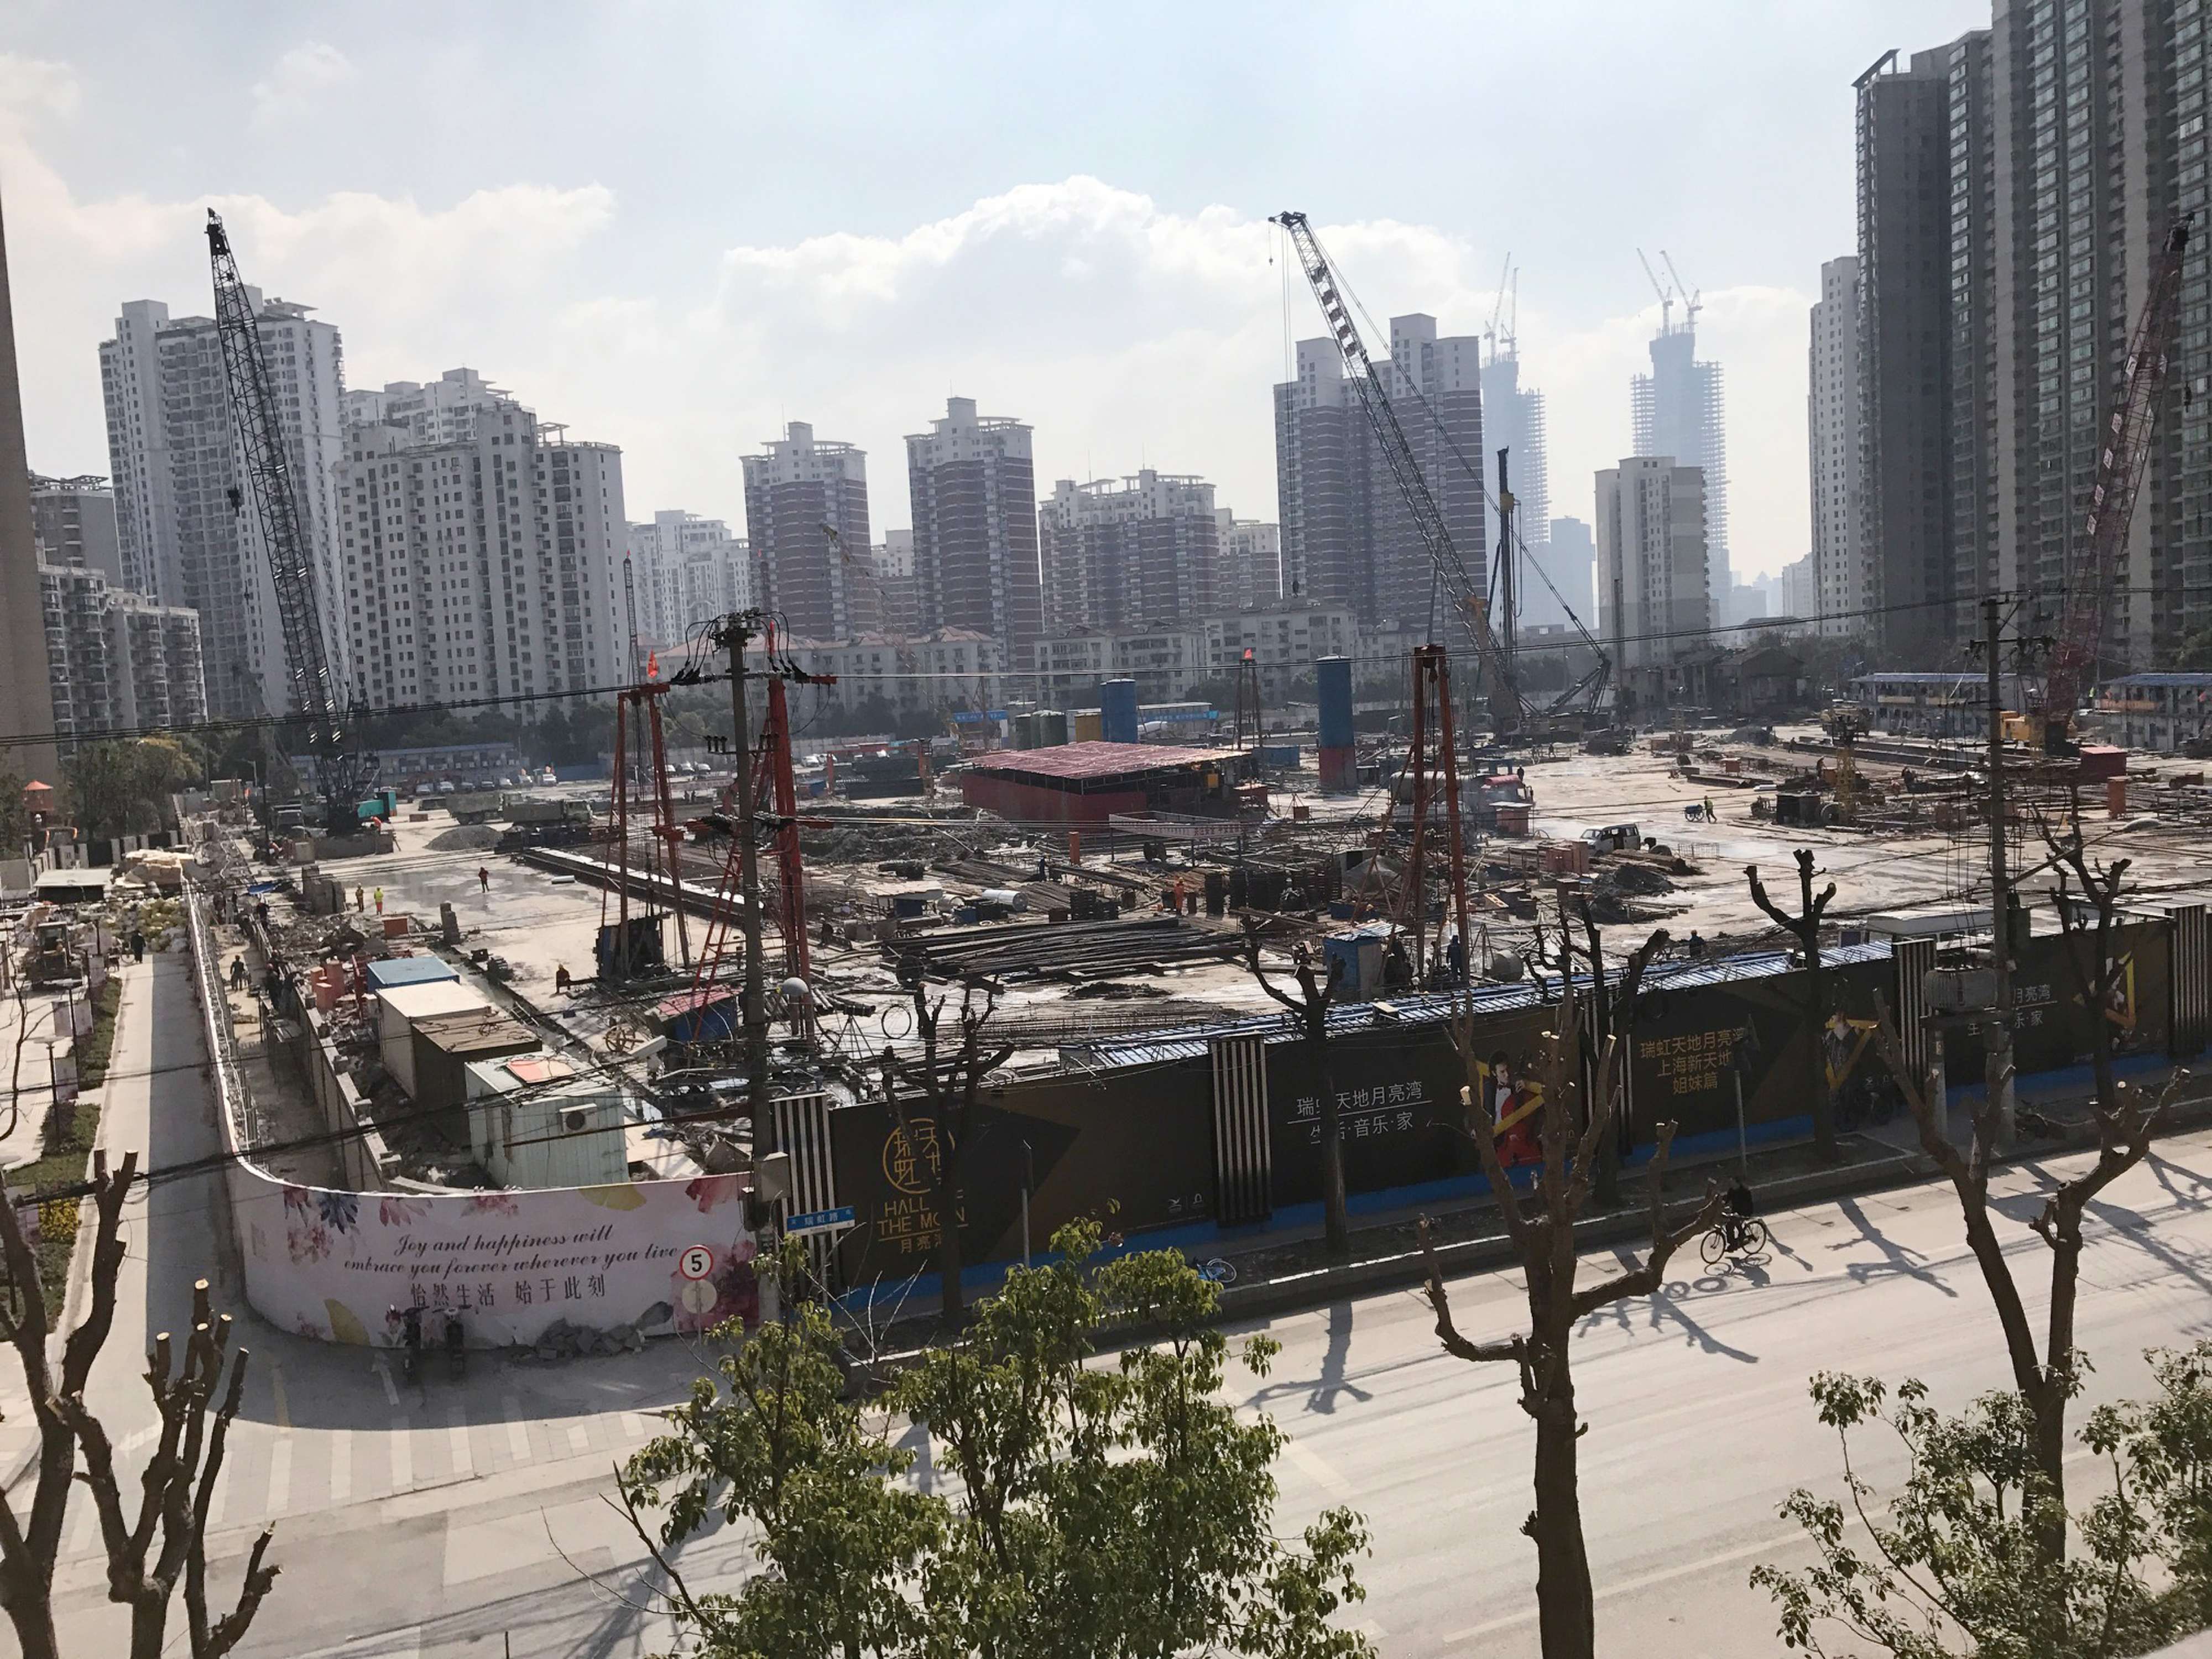 The sale, for an estimated 8 billion yuan, is part of Shui On chairman Vincent Lo’s ‘asset-light’ strategy since 2015 to pare the developer’s debt